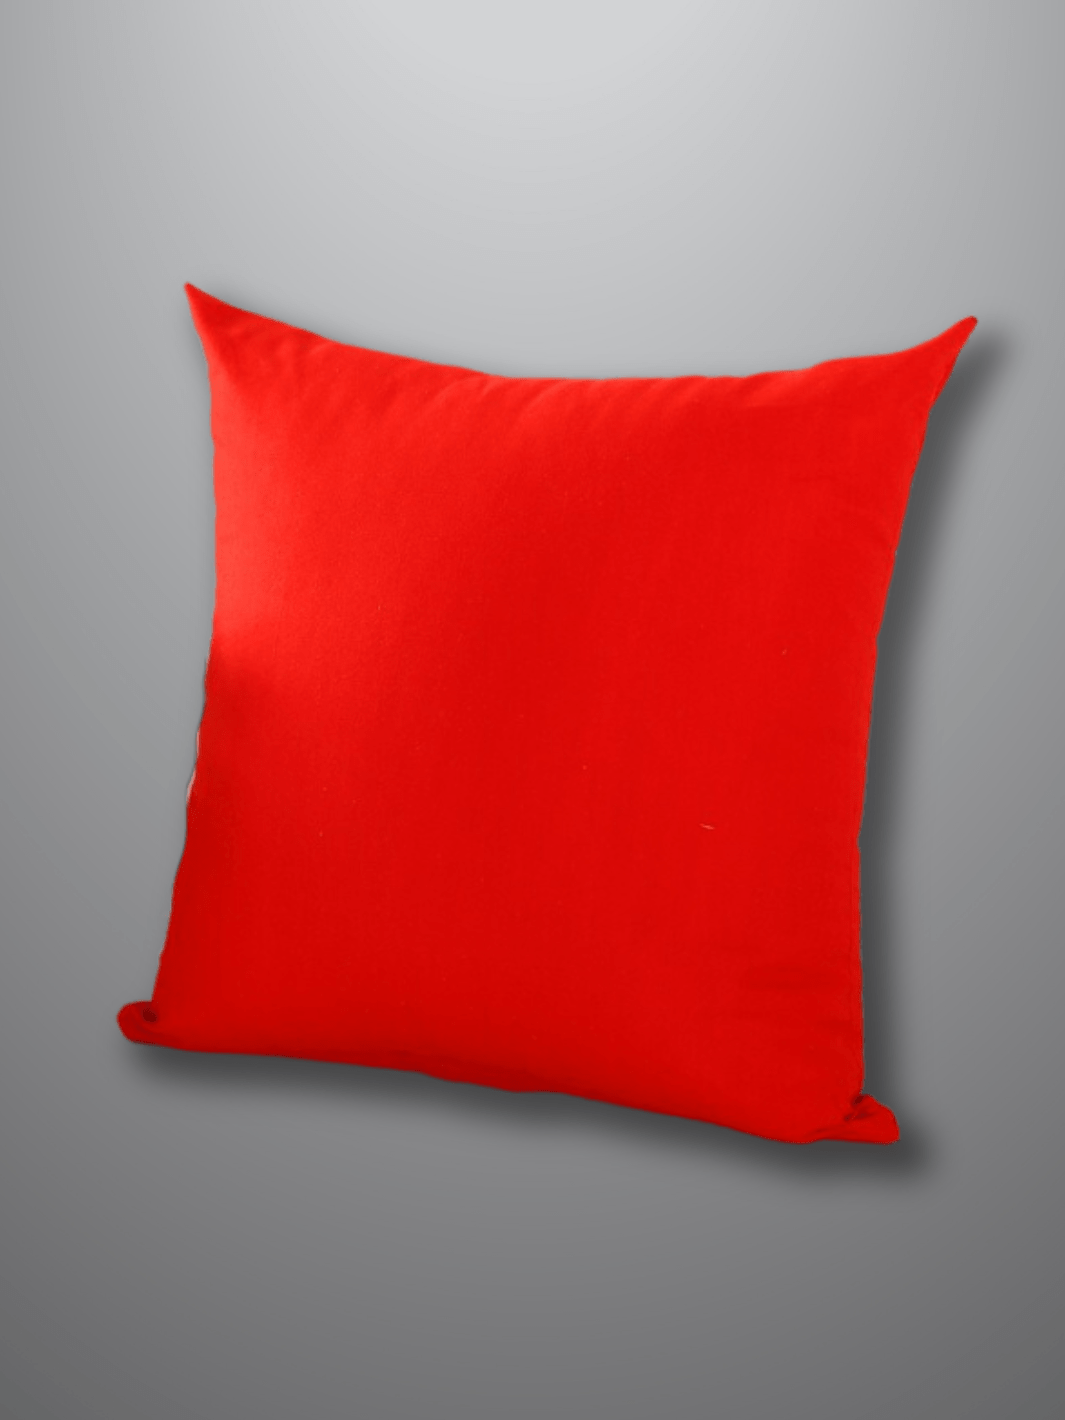 60×60 / 23.7"×23.7" / rouge